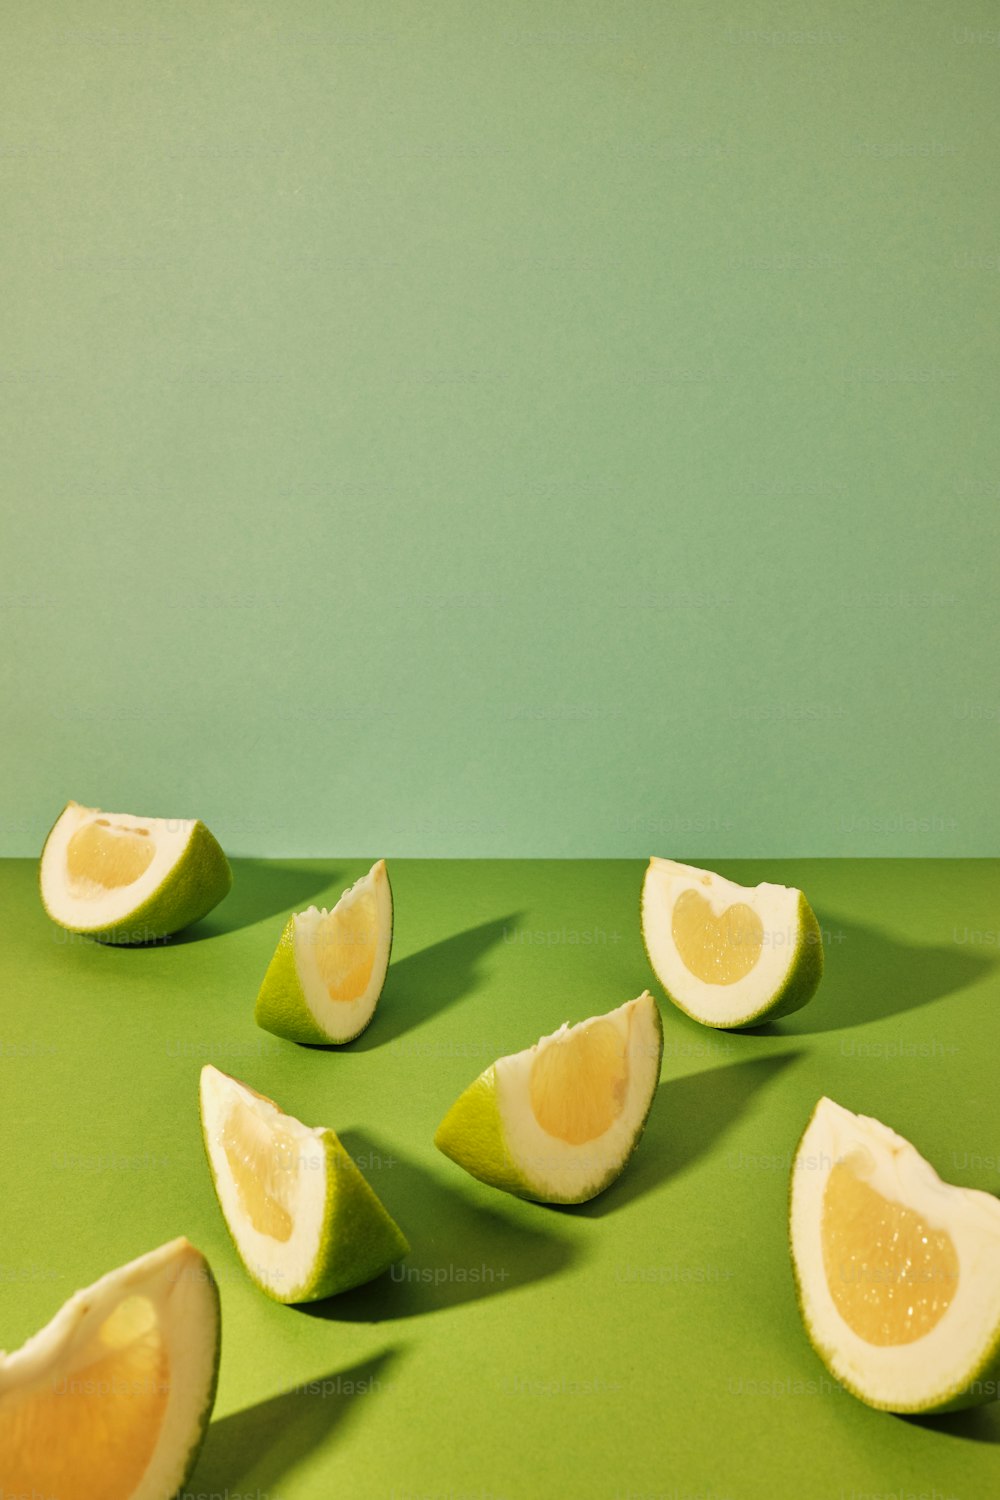 a lime cut in half on a green surface